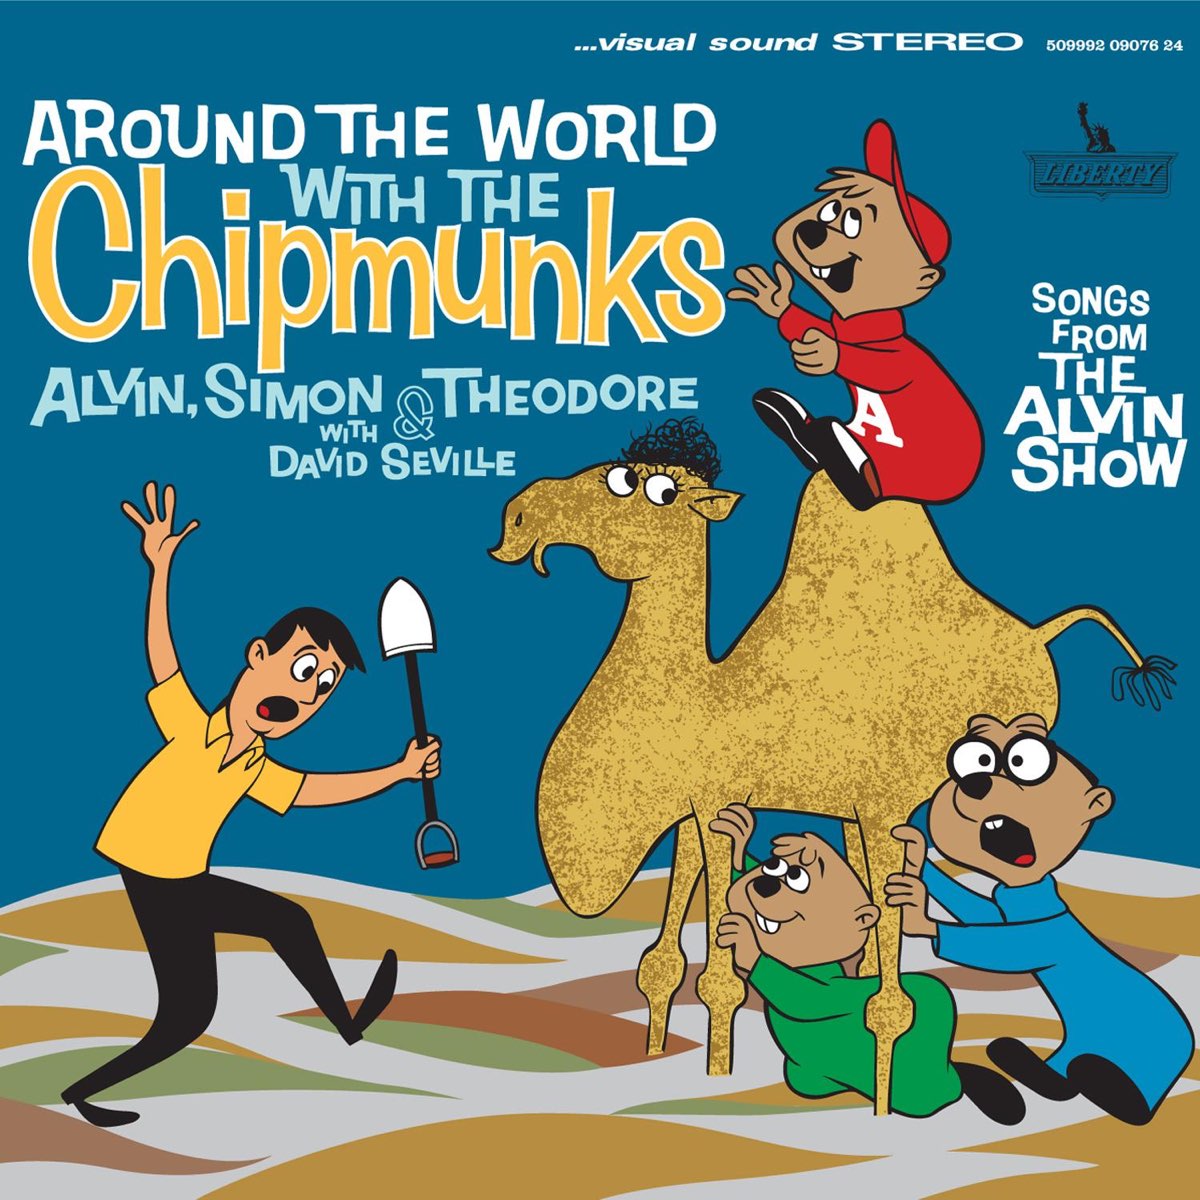 Around the World With the Chipmunks by The Chipmunks on Apple Music